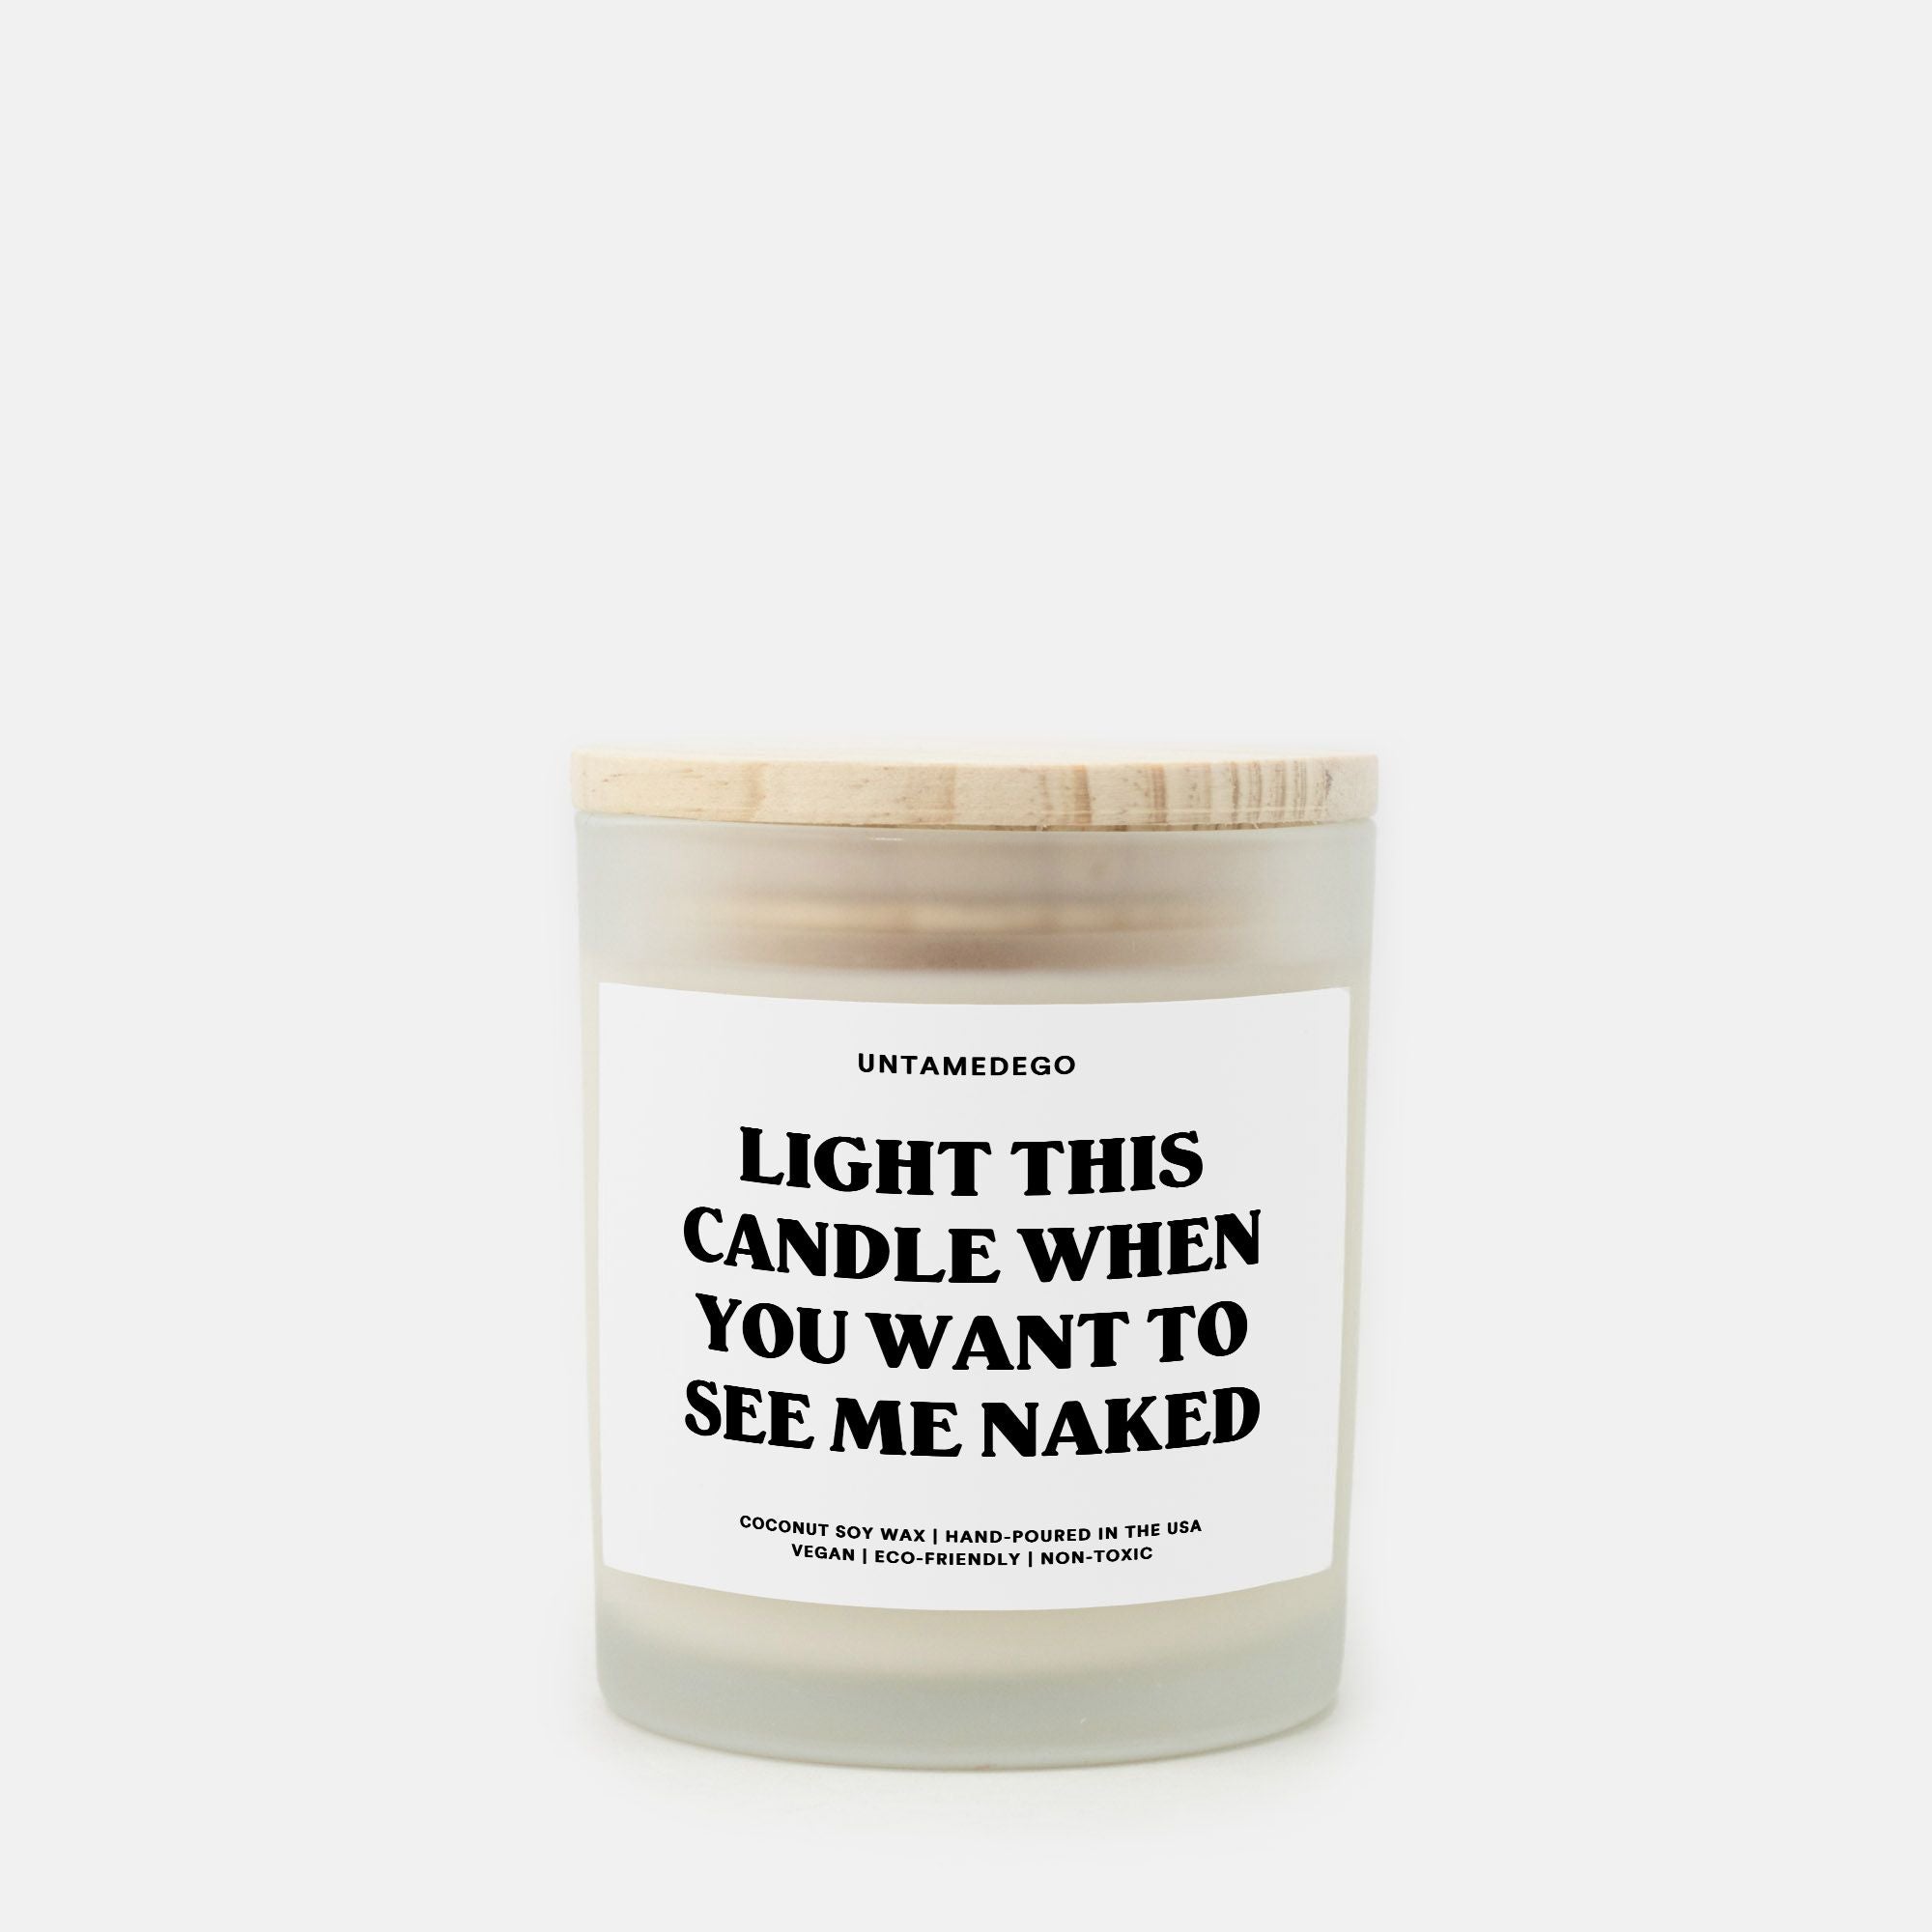 Light This Candle When You Want To See Me Naked Frosted Glass Jar Candle - UntamedEgo LLC.